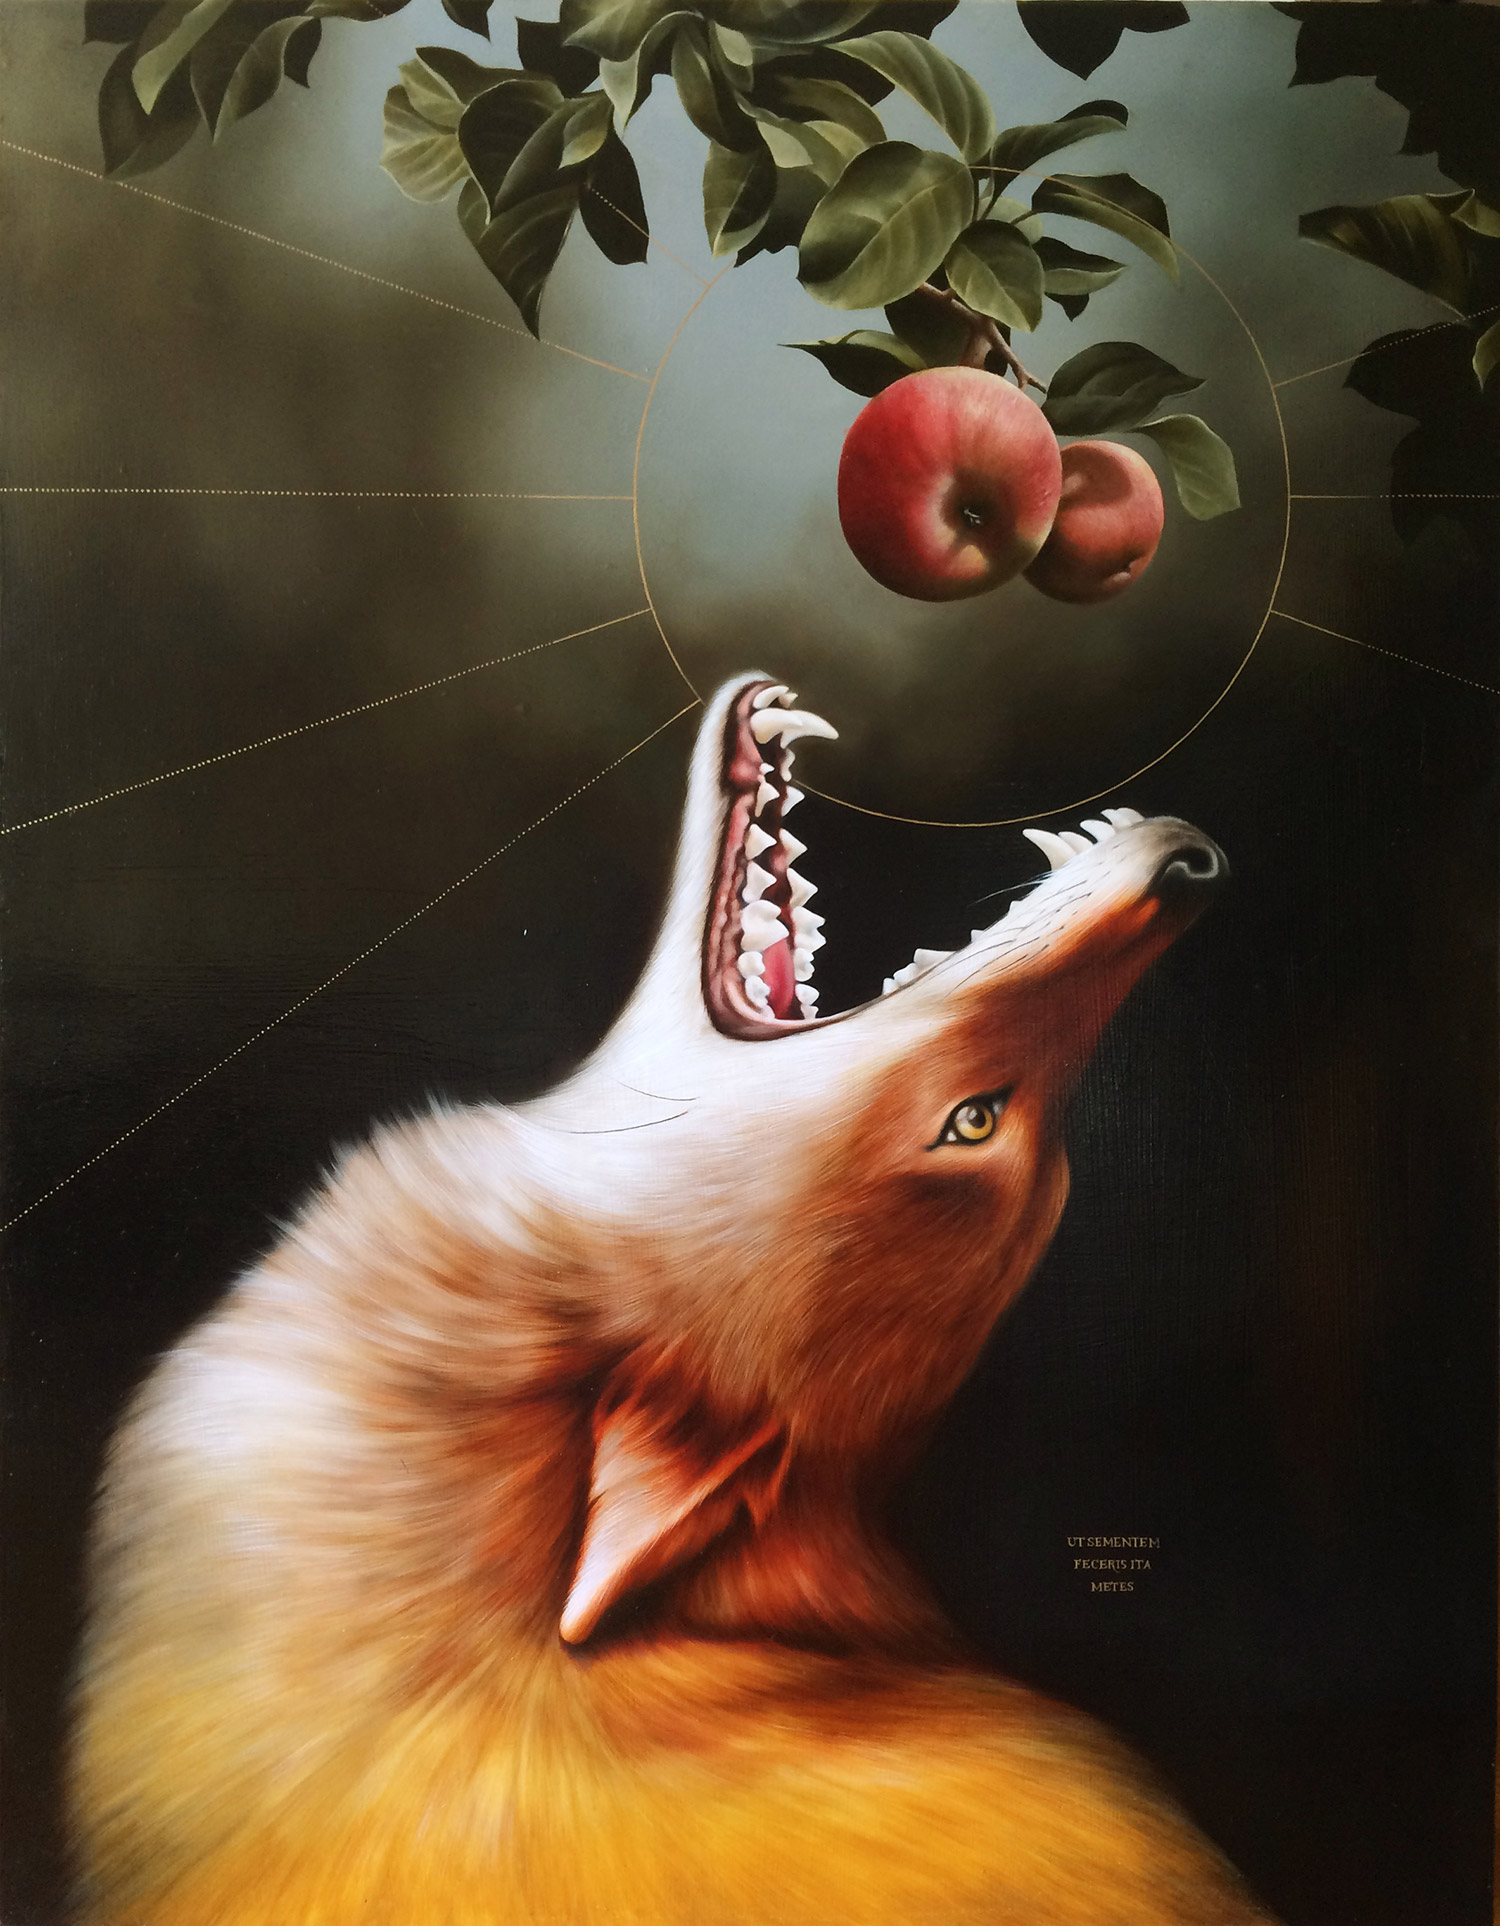 Josie Morway - As You Sew, fox and fruit